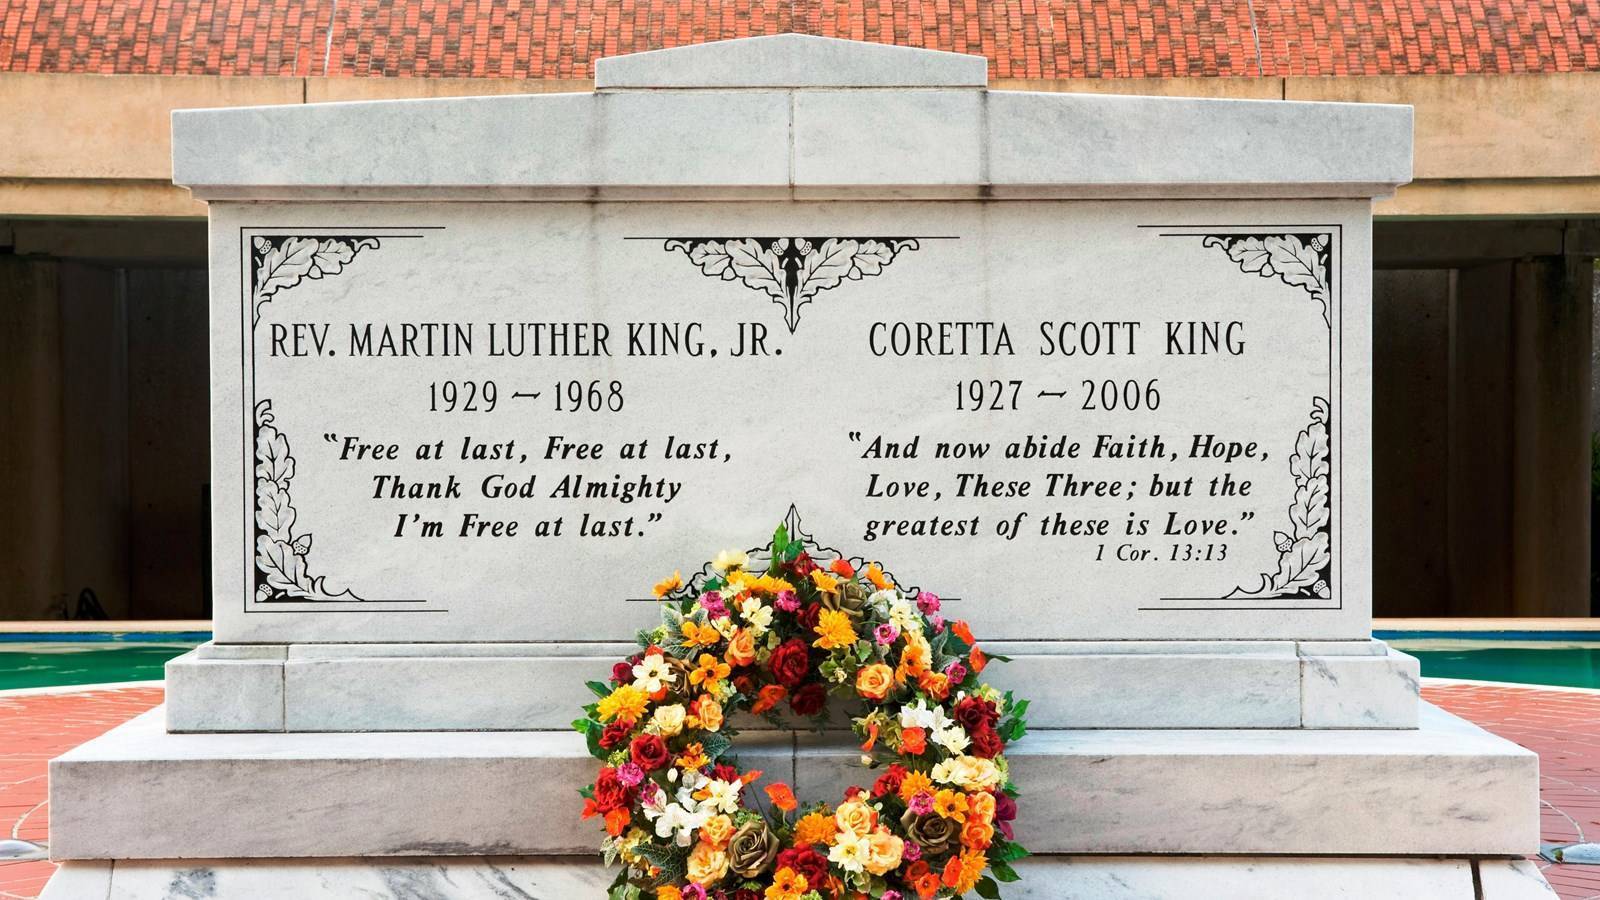 Martin Luther King Jr. National Historic Site: A Legendary Civil Rights Icon